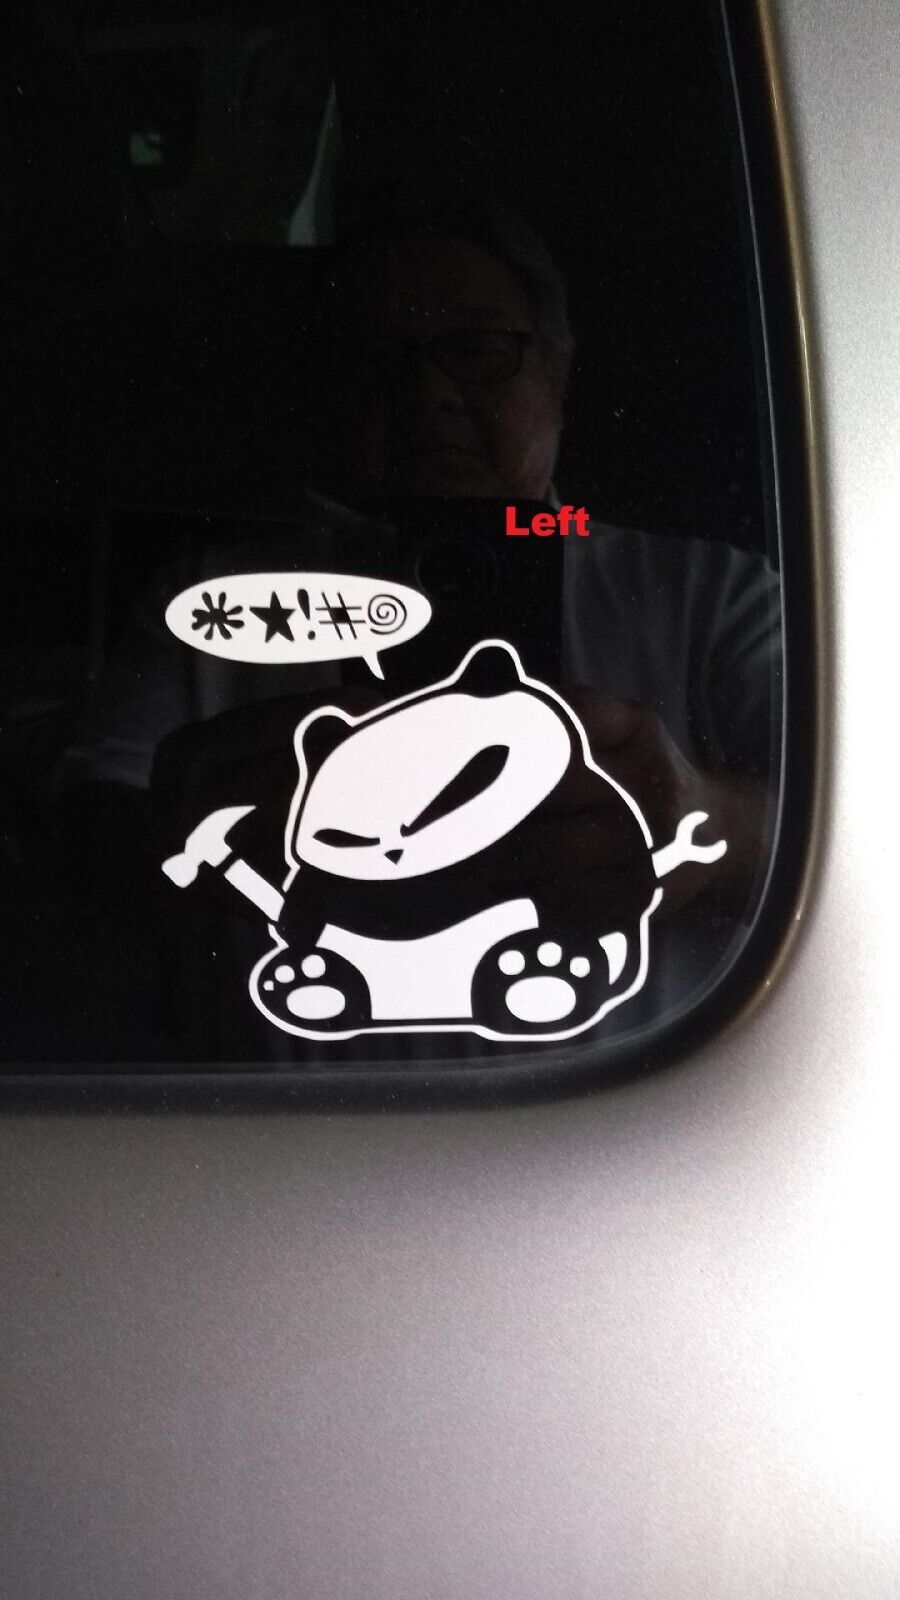 Parts Panda Window Vinyl Decal - White JDM Drift Angry Frustrated Hammer Wrench